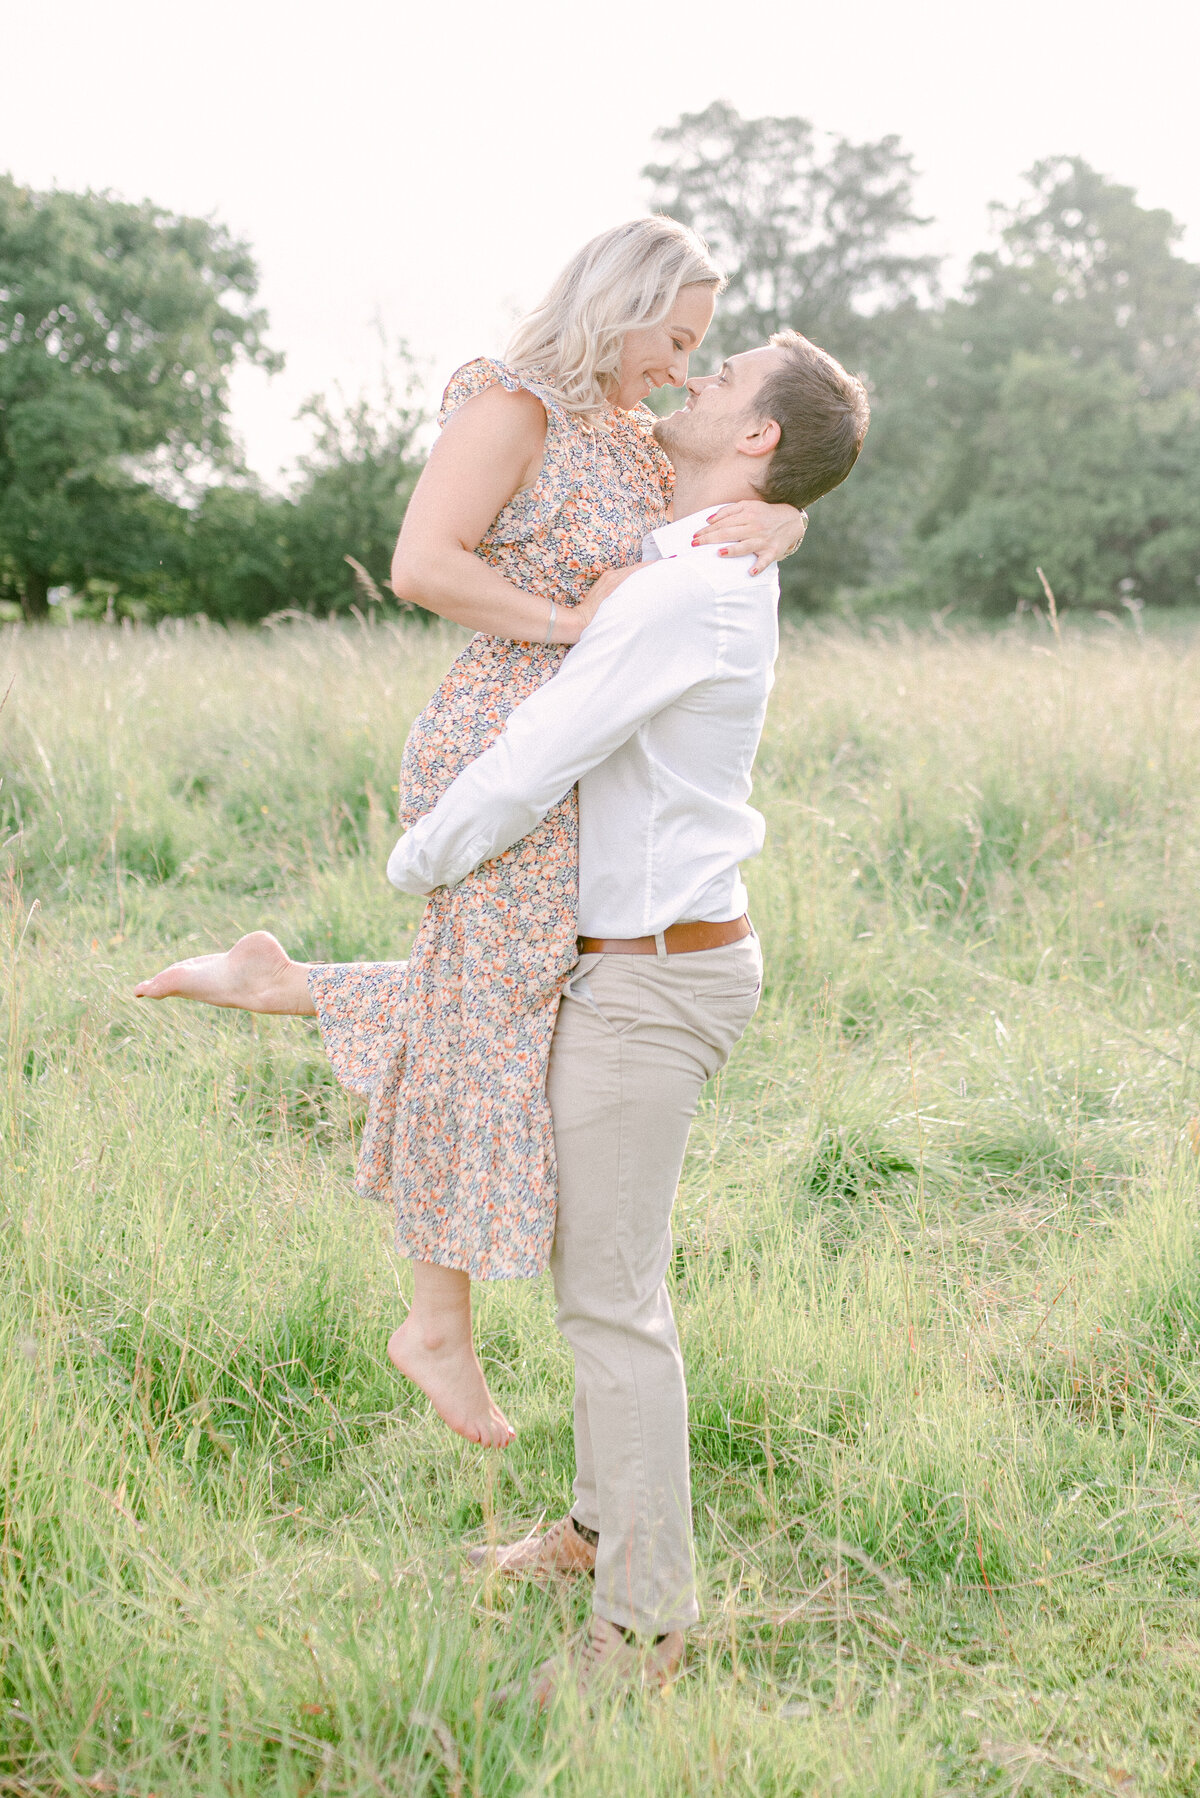 Light and airy engagement photoshoot